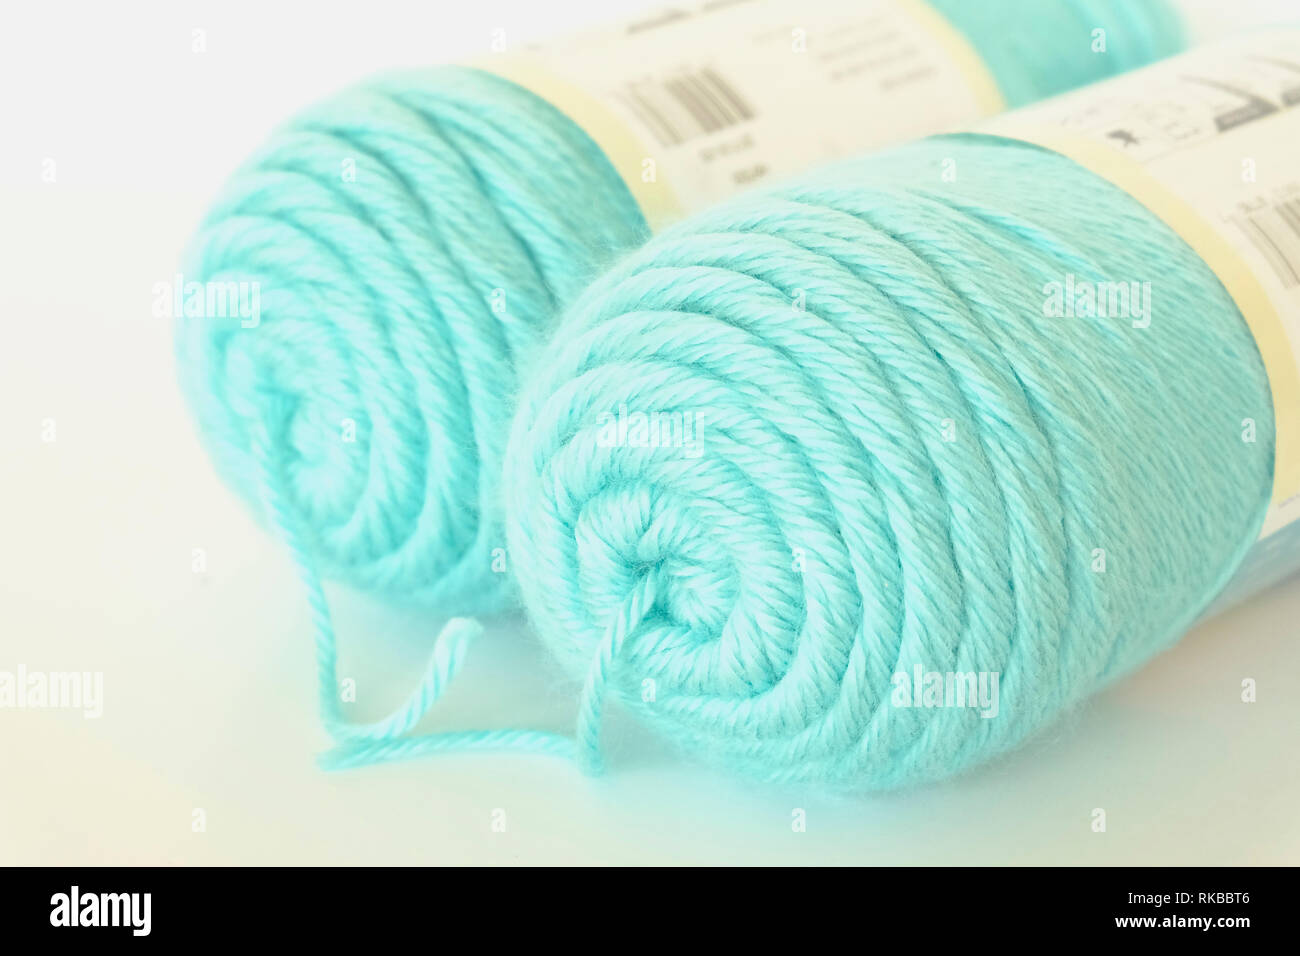 Two large balls of duck egg blue knitting wool against a white background Stock Photo